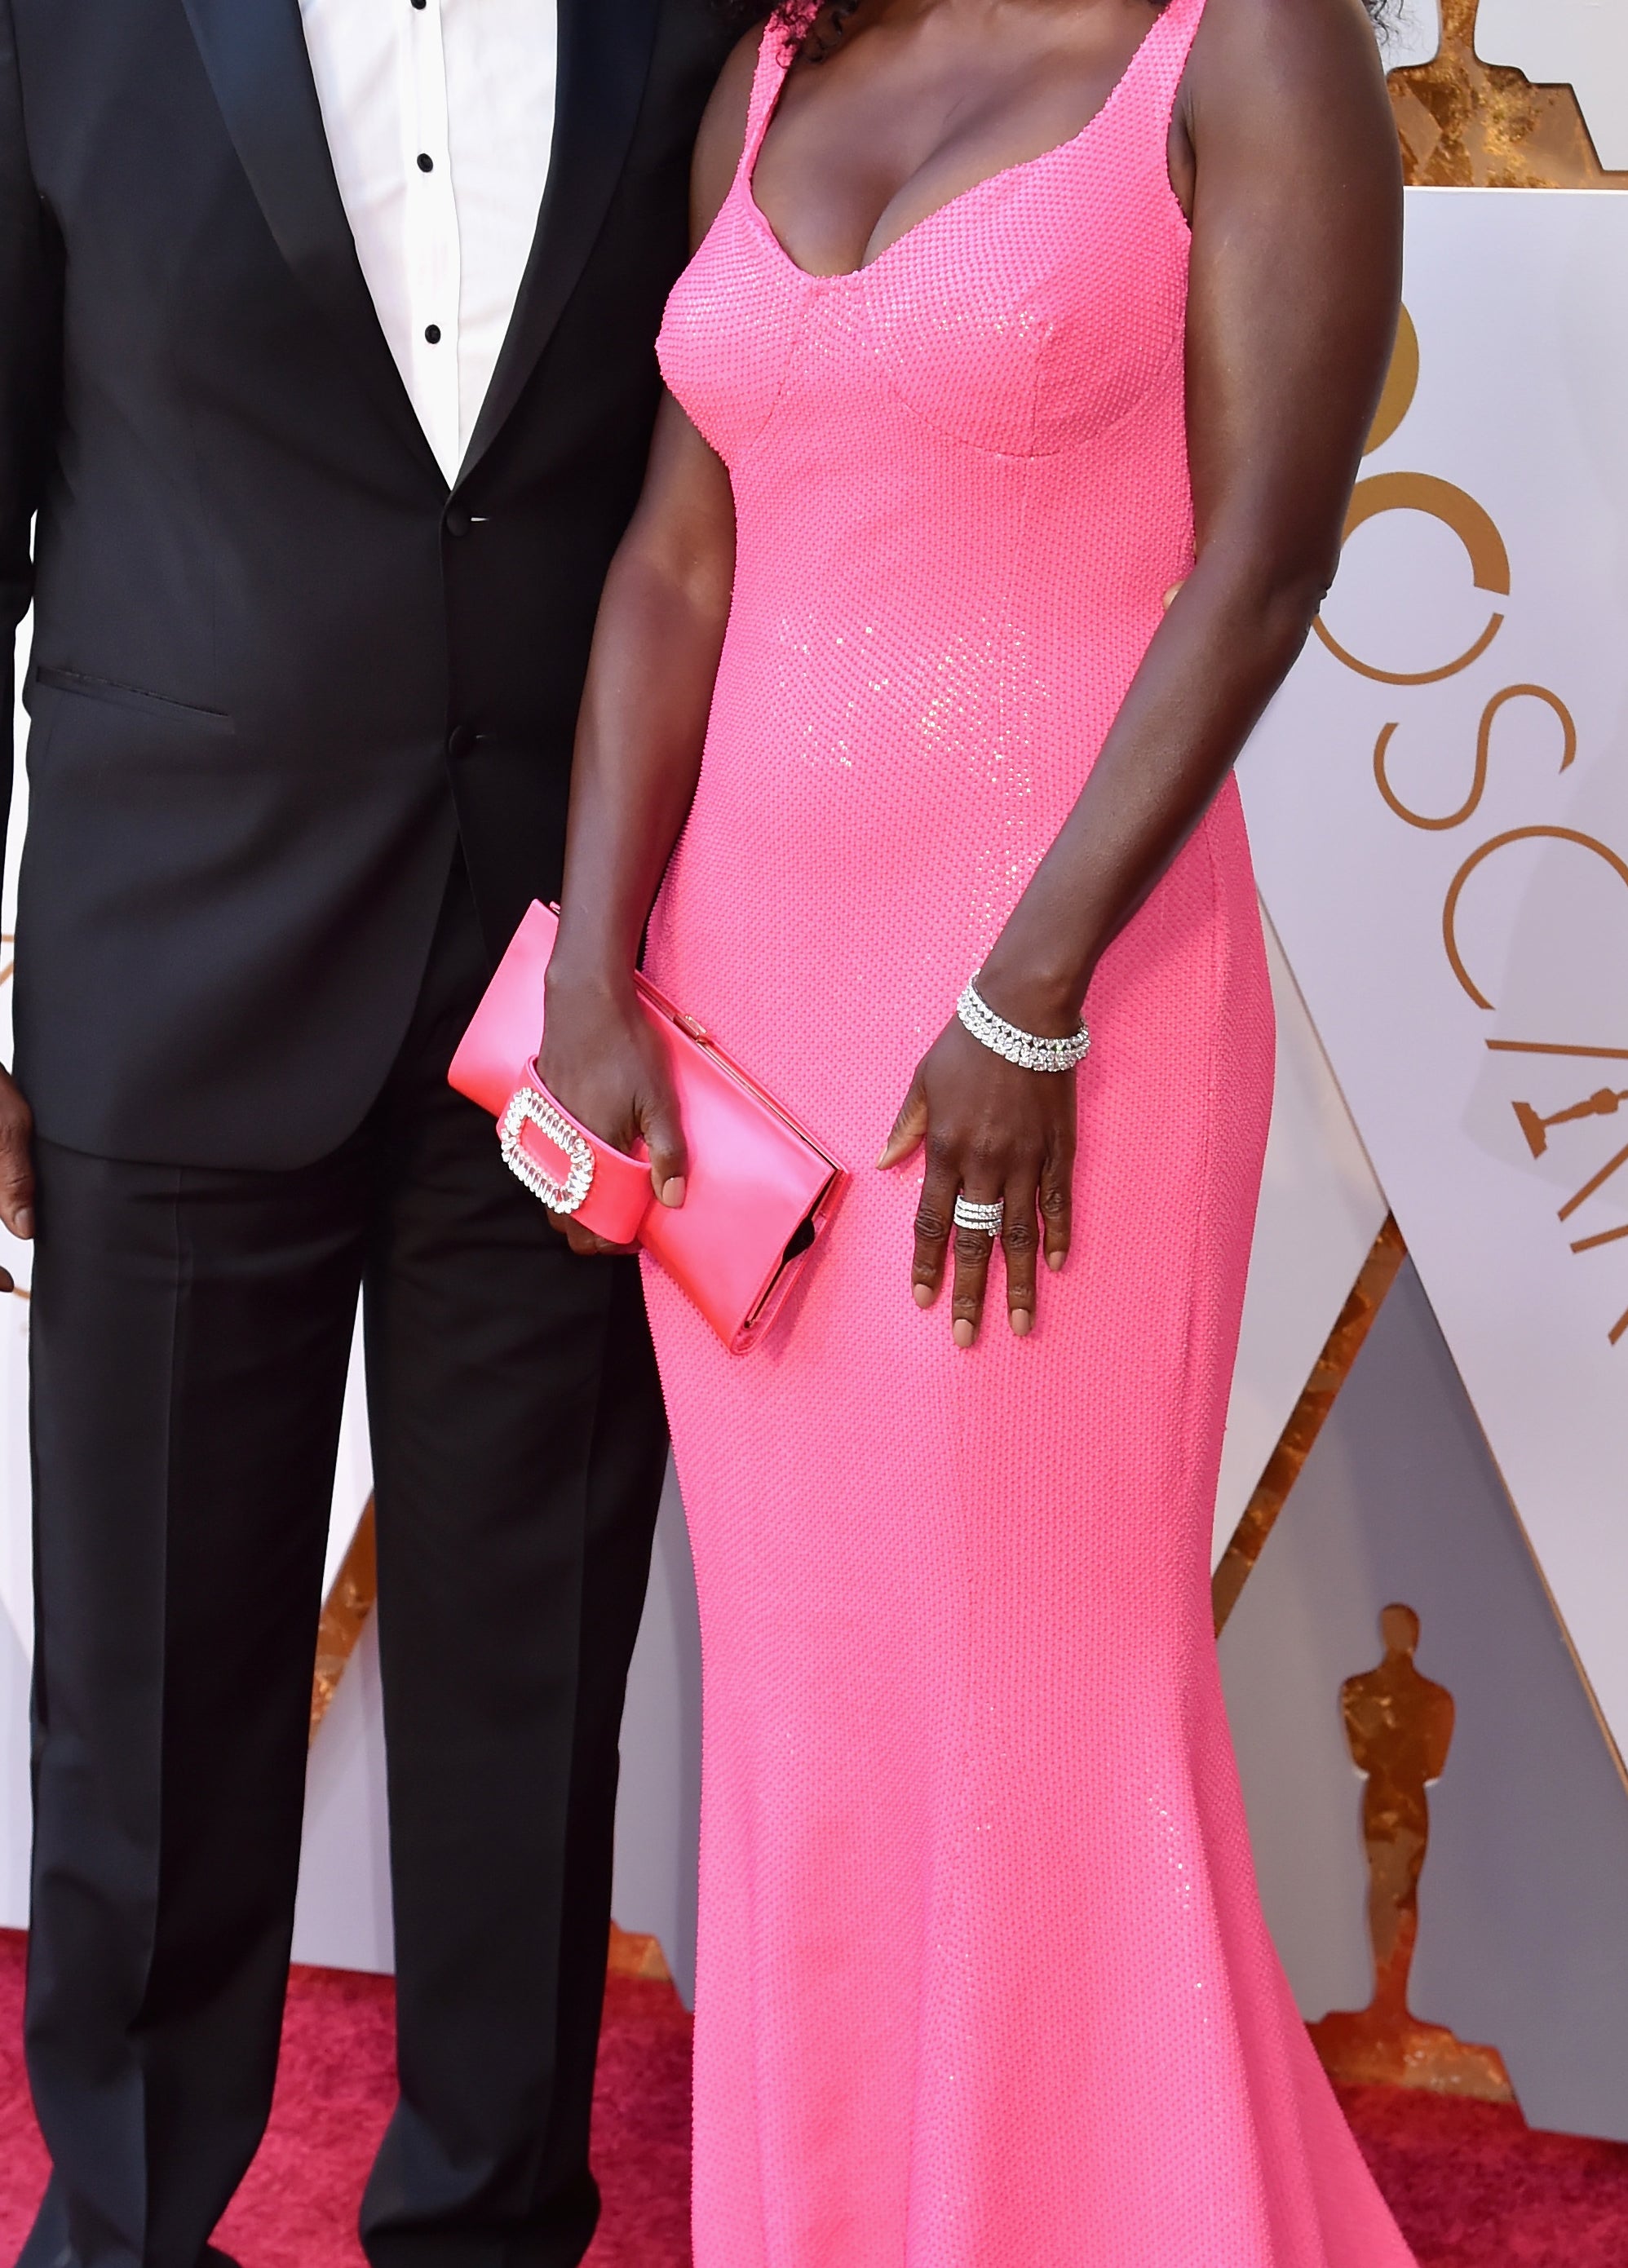 Two individuals posing at the Oscars, one in a black tuxedo, the other in a pink sleeveless gown with a clutch